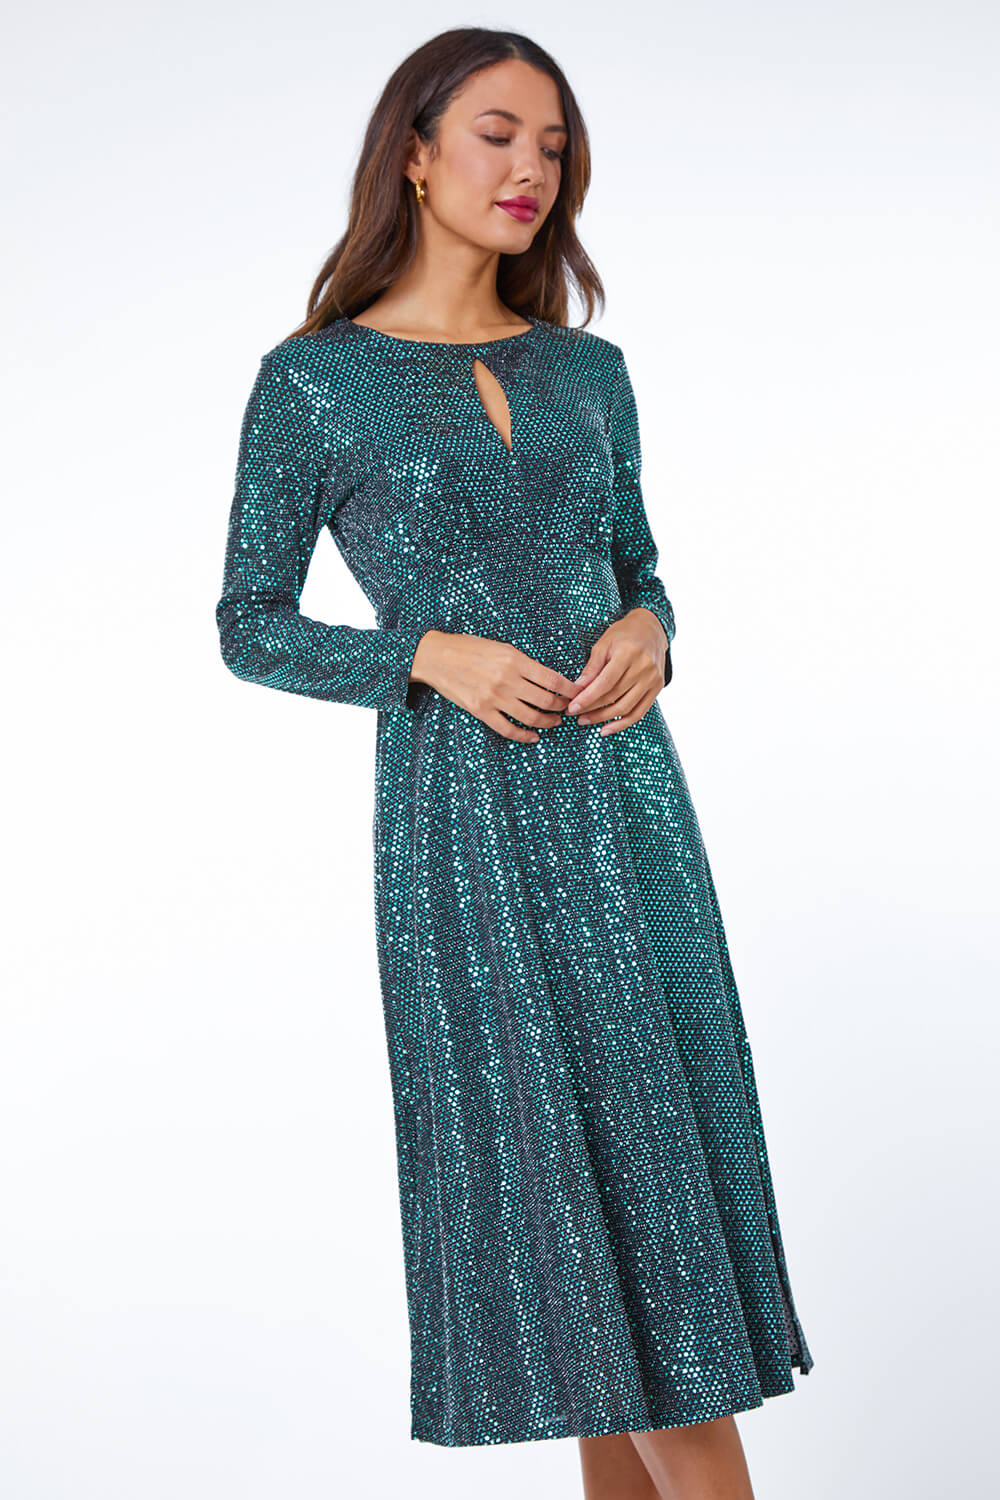 Emerald Sequin Keyhole Detail Ruched Midi Dress, Image 4 of 5